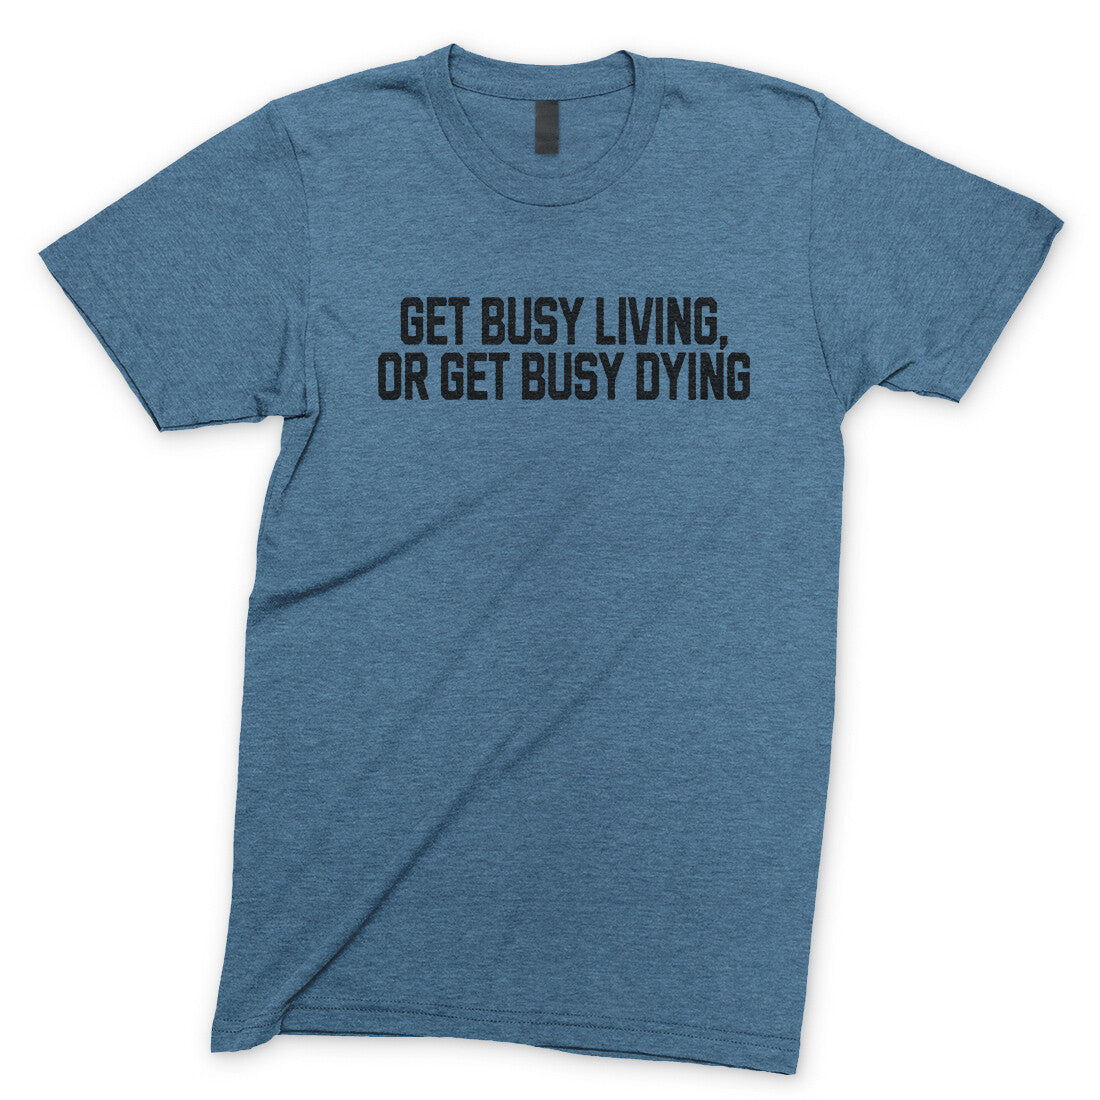 Get Busy Living or Get Busy Dying in Heather Indigo Color